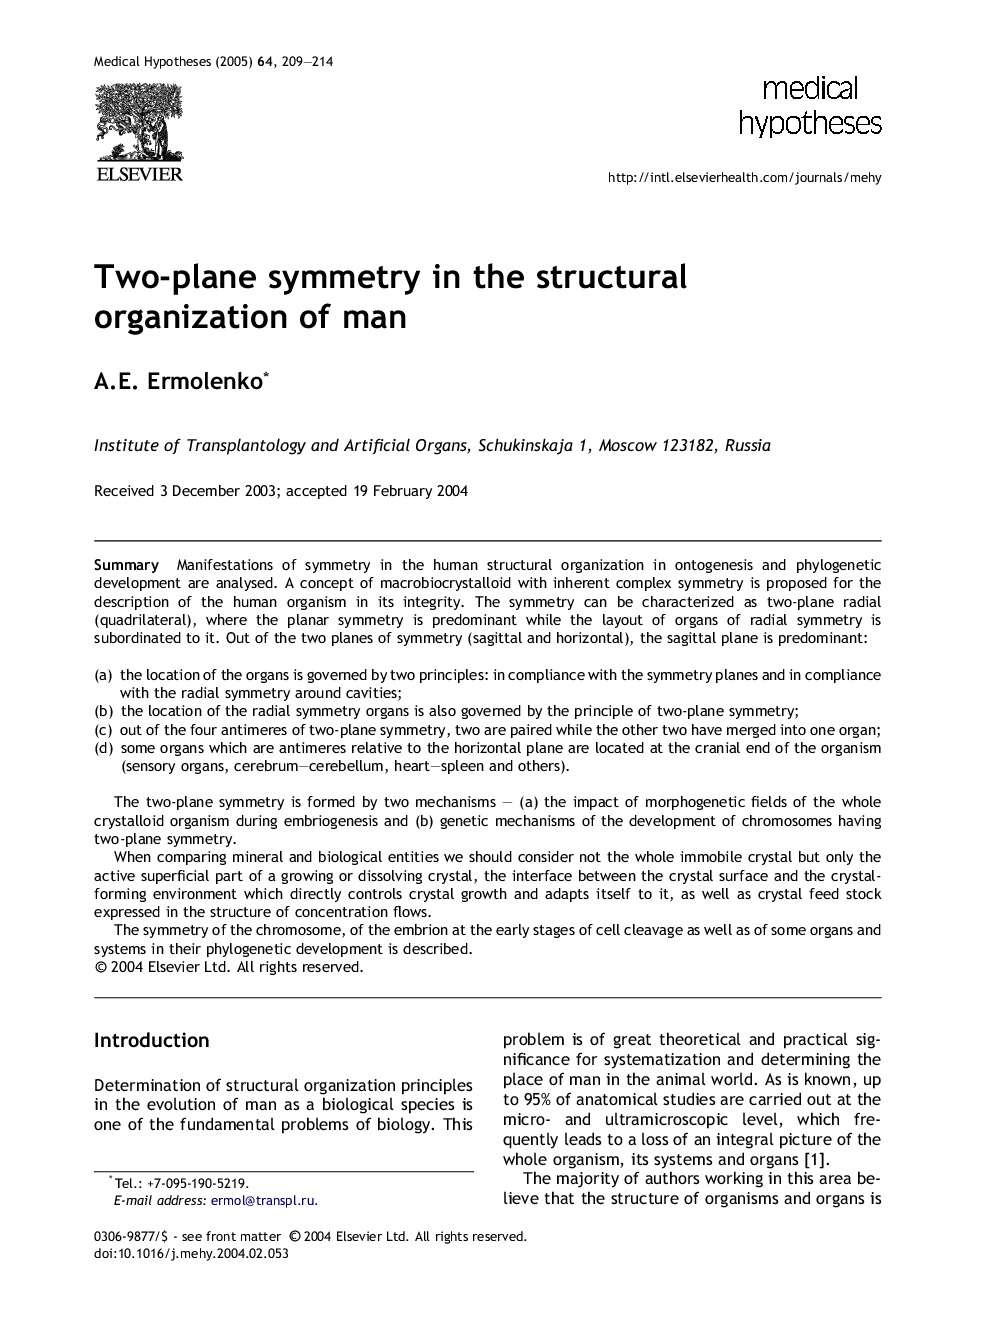 Two-plane symmetry in the structural organization of man